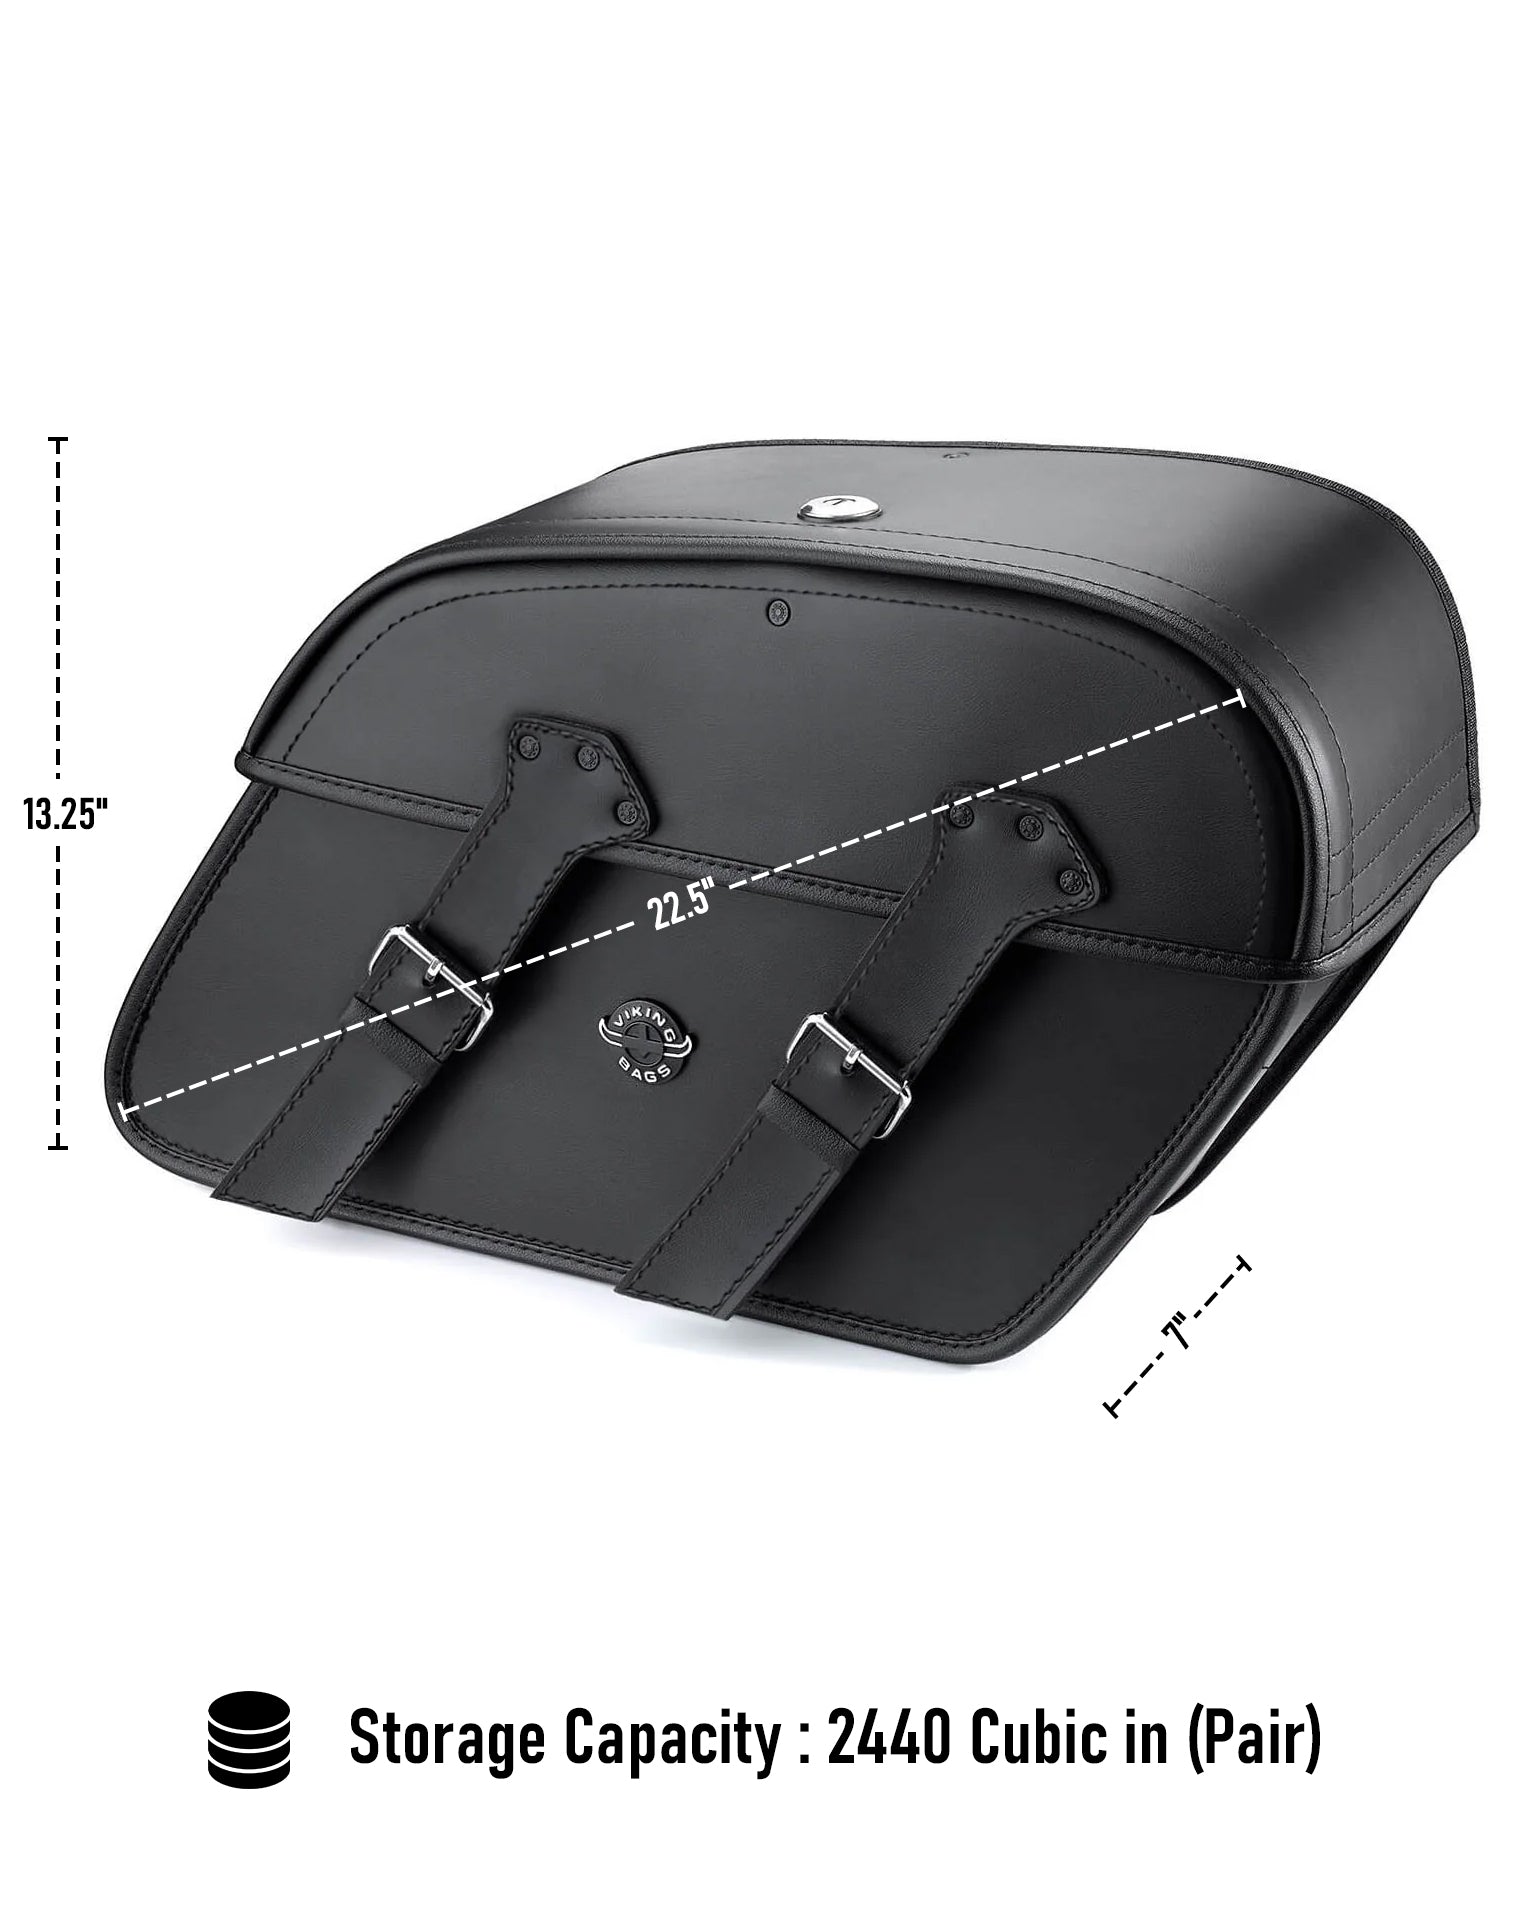 Viking Raven Extra Large Kawasaki Vulcan 900 Classic Vn900 Leather Motorcycle Saddlebags Can Store Your Ridings Gears